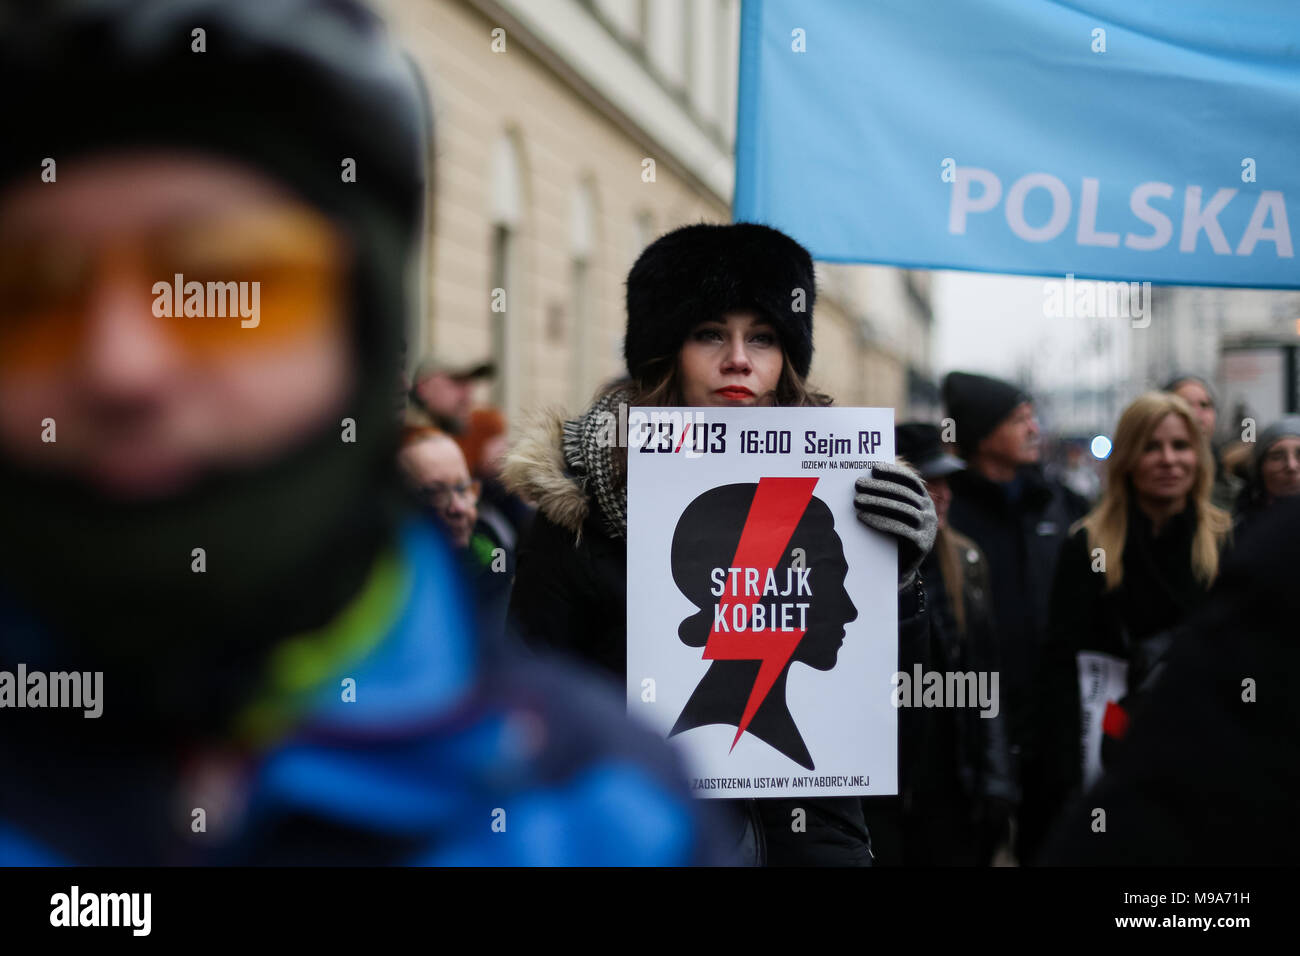 Warsaw, Poland. 23rd March, 2018. People attend protests against proposed anti-abortion draft law reffered by civil initiative in Polish Parliament. The issue of separating state and religion was also held, as Catholic Church was one of the main factors in political decisions. Stock Photo